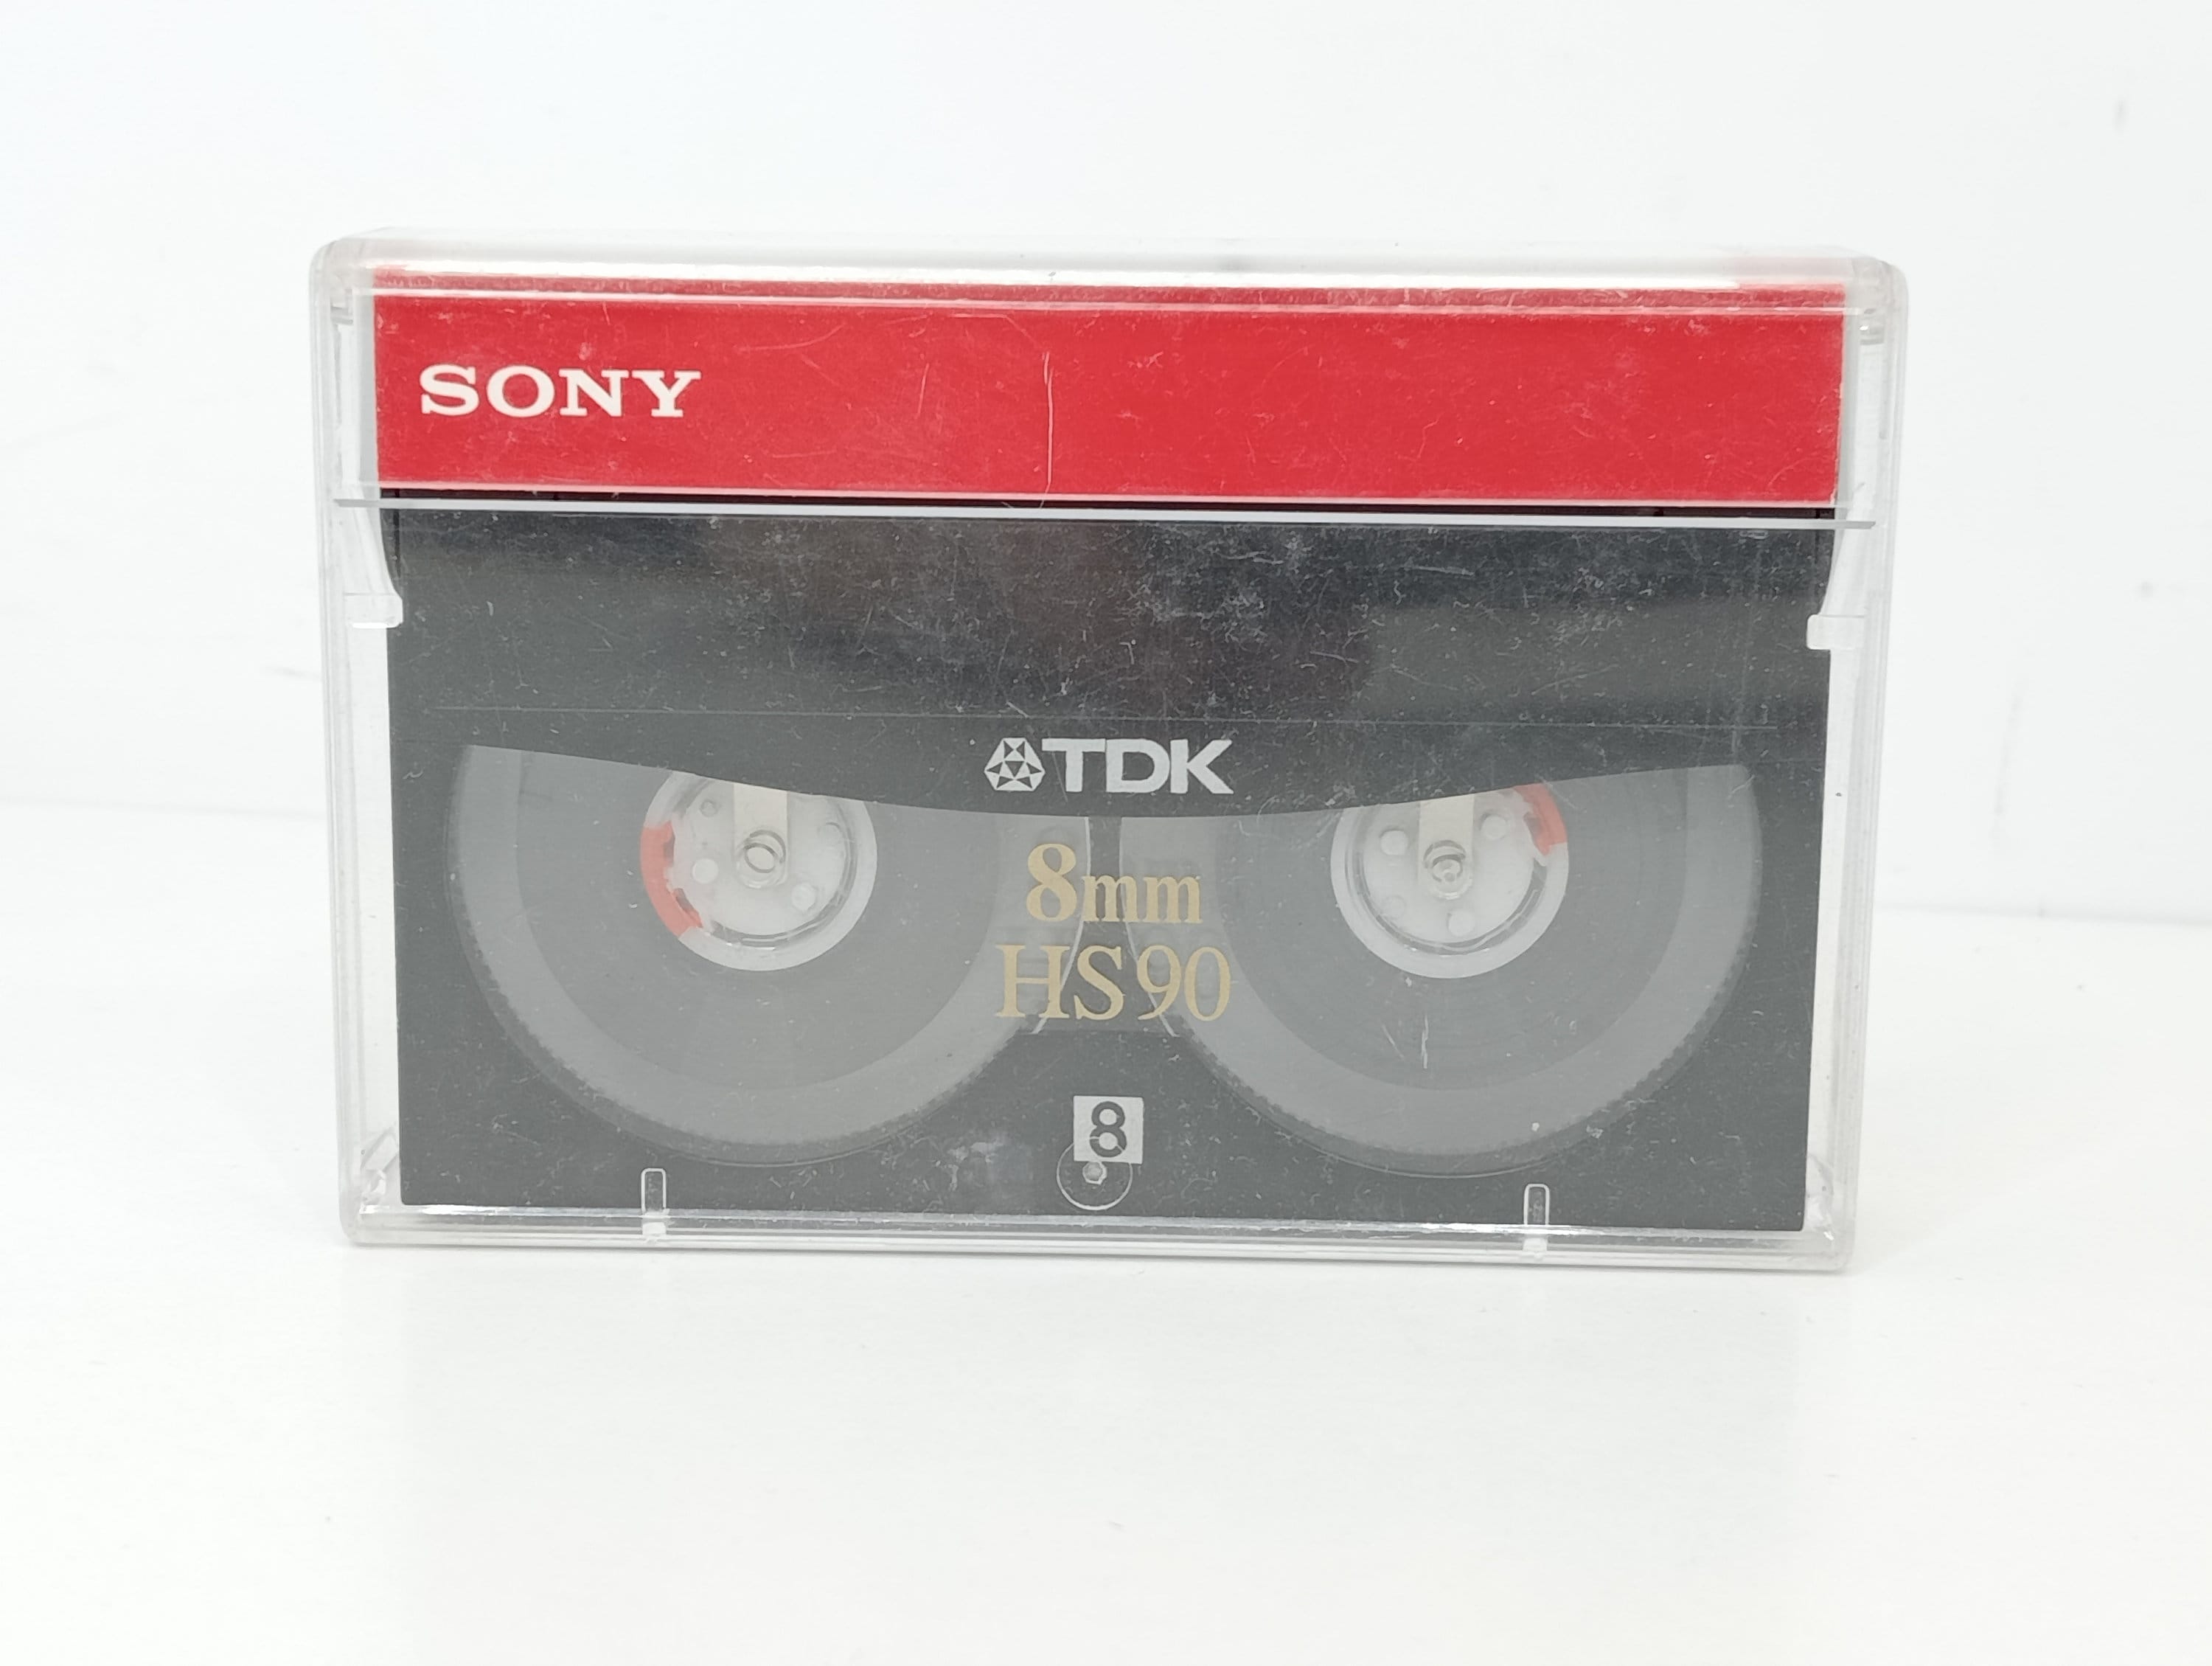 SONY 8MM 120 Minutes Cassette Tape 3 Pack 